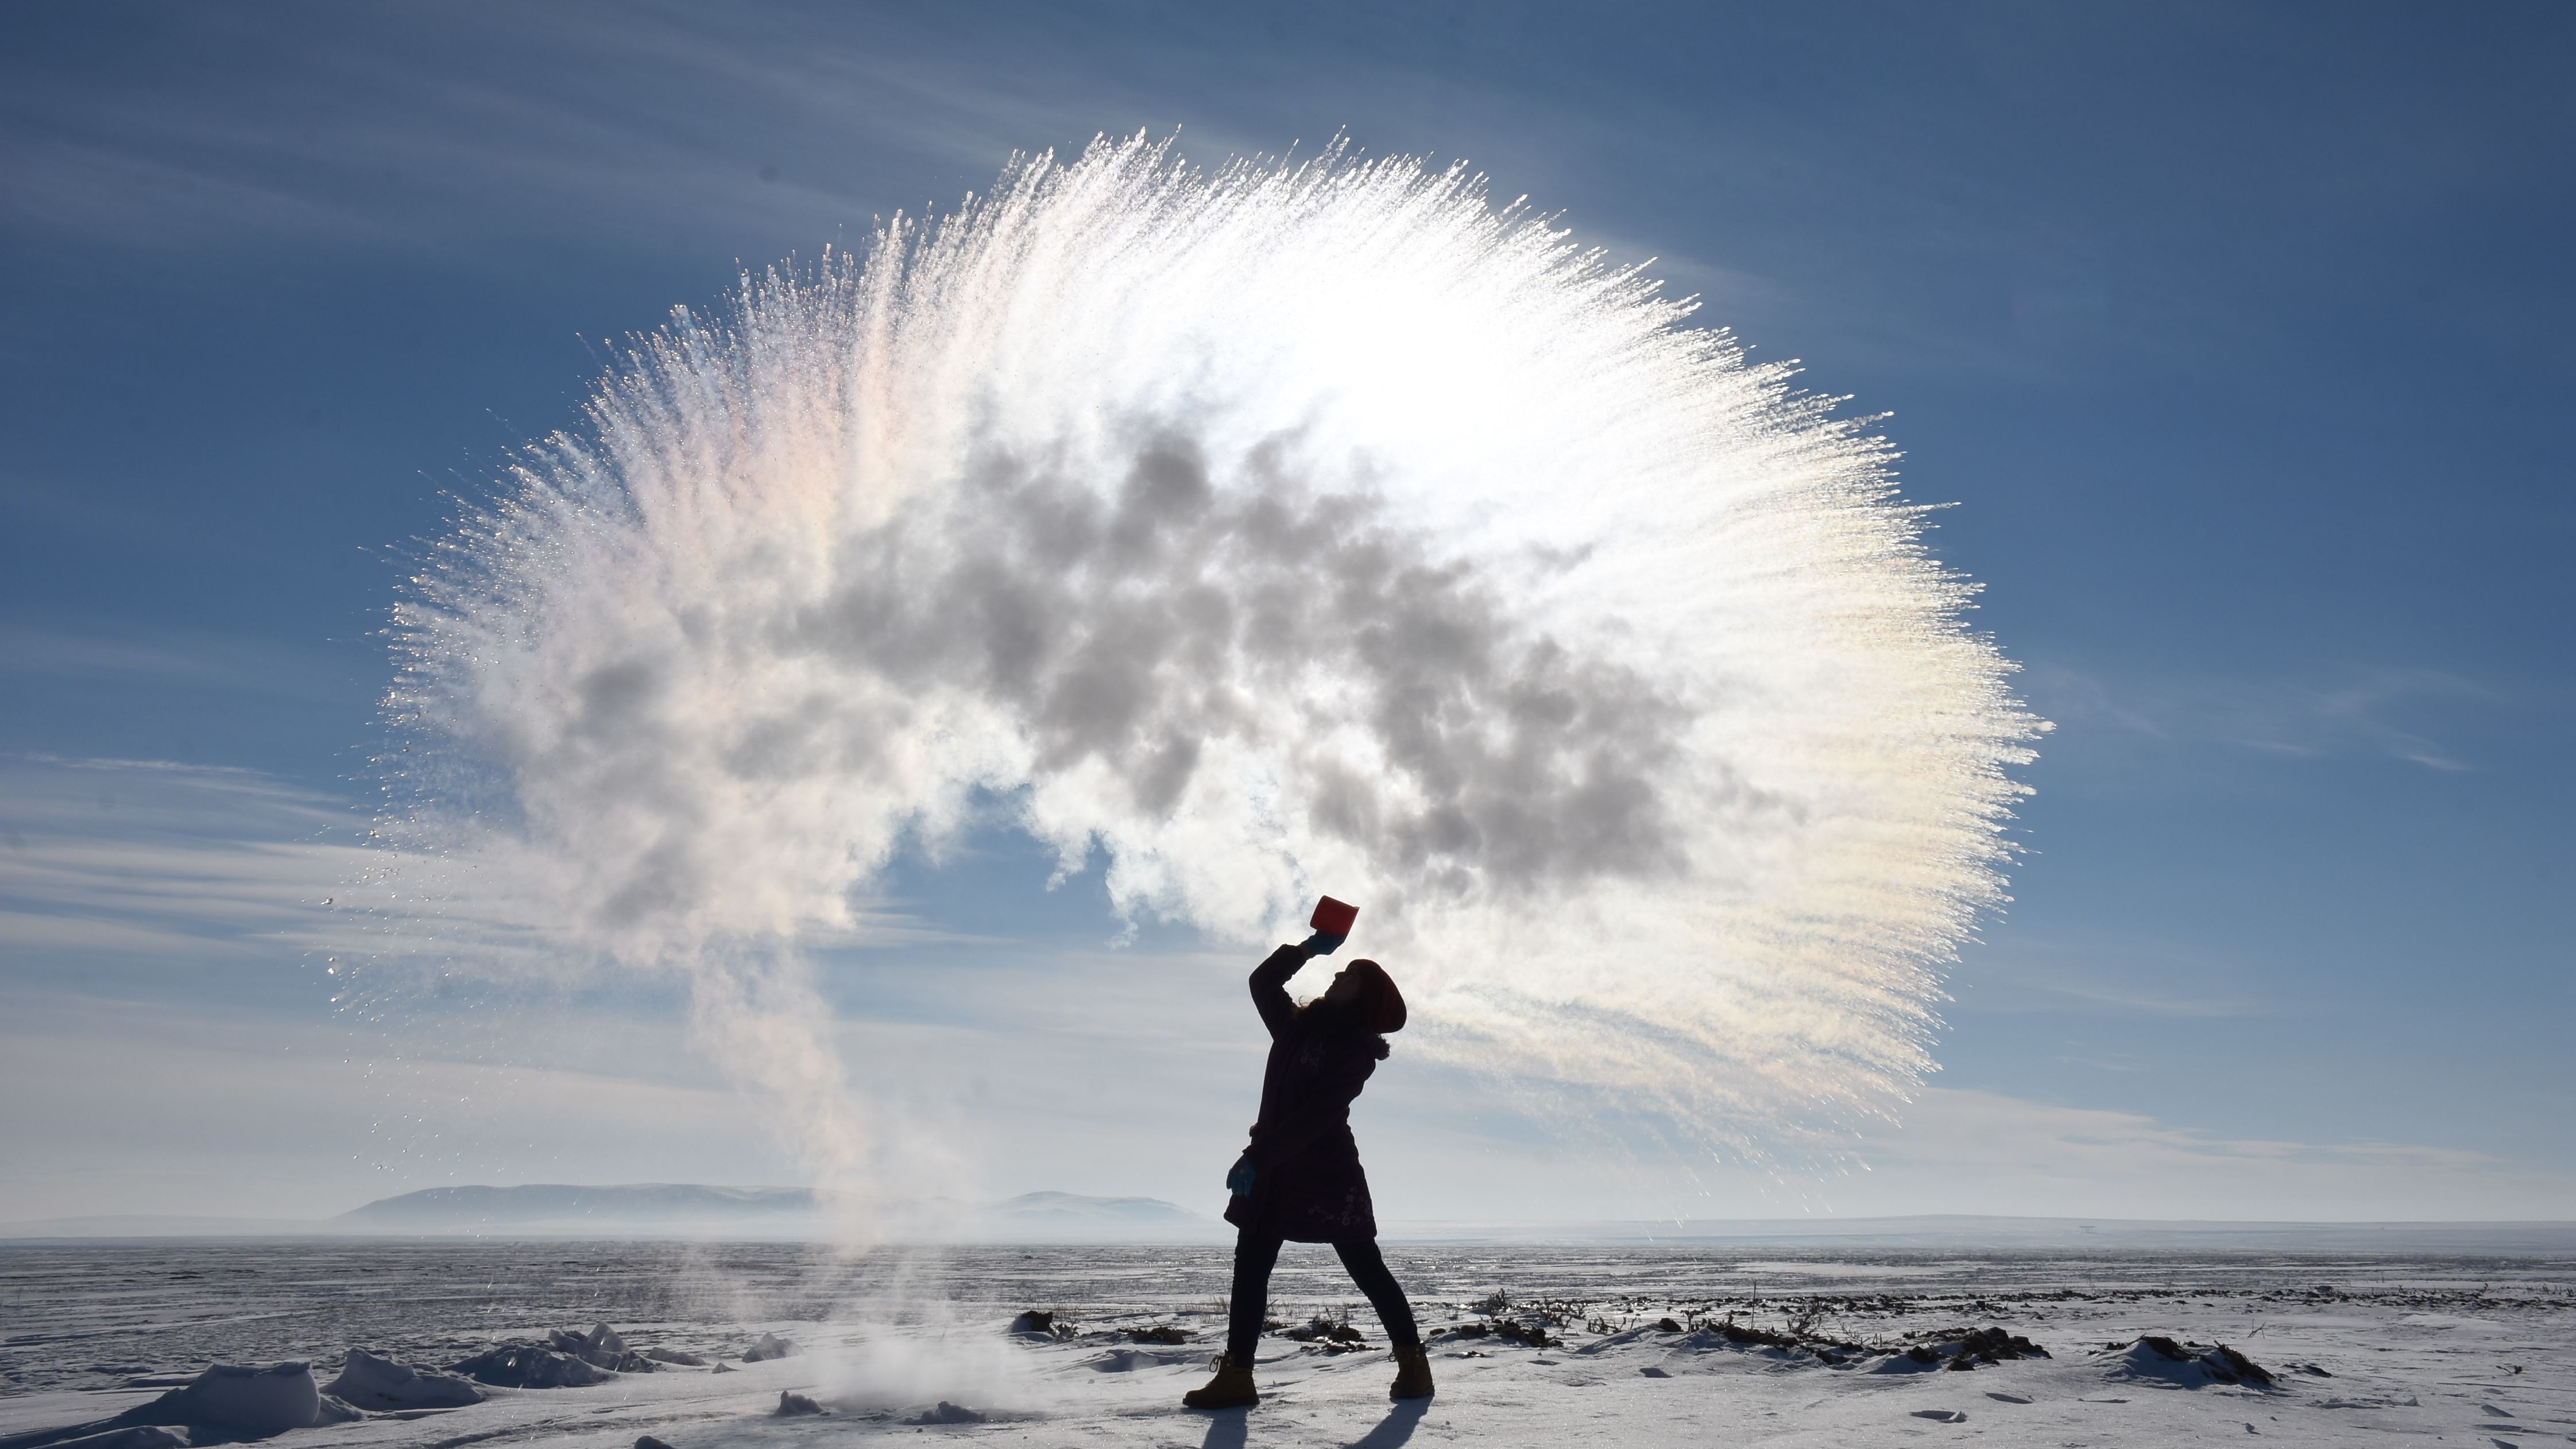 A woman tosses hot water into the freezing cold air in Kars, Turkey, on Sunday, January 20.